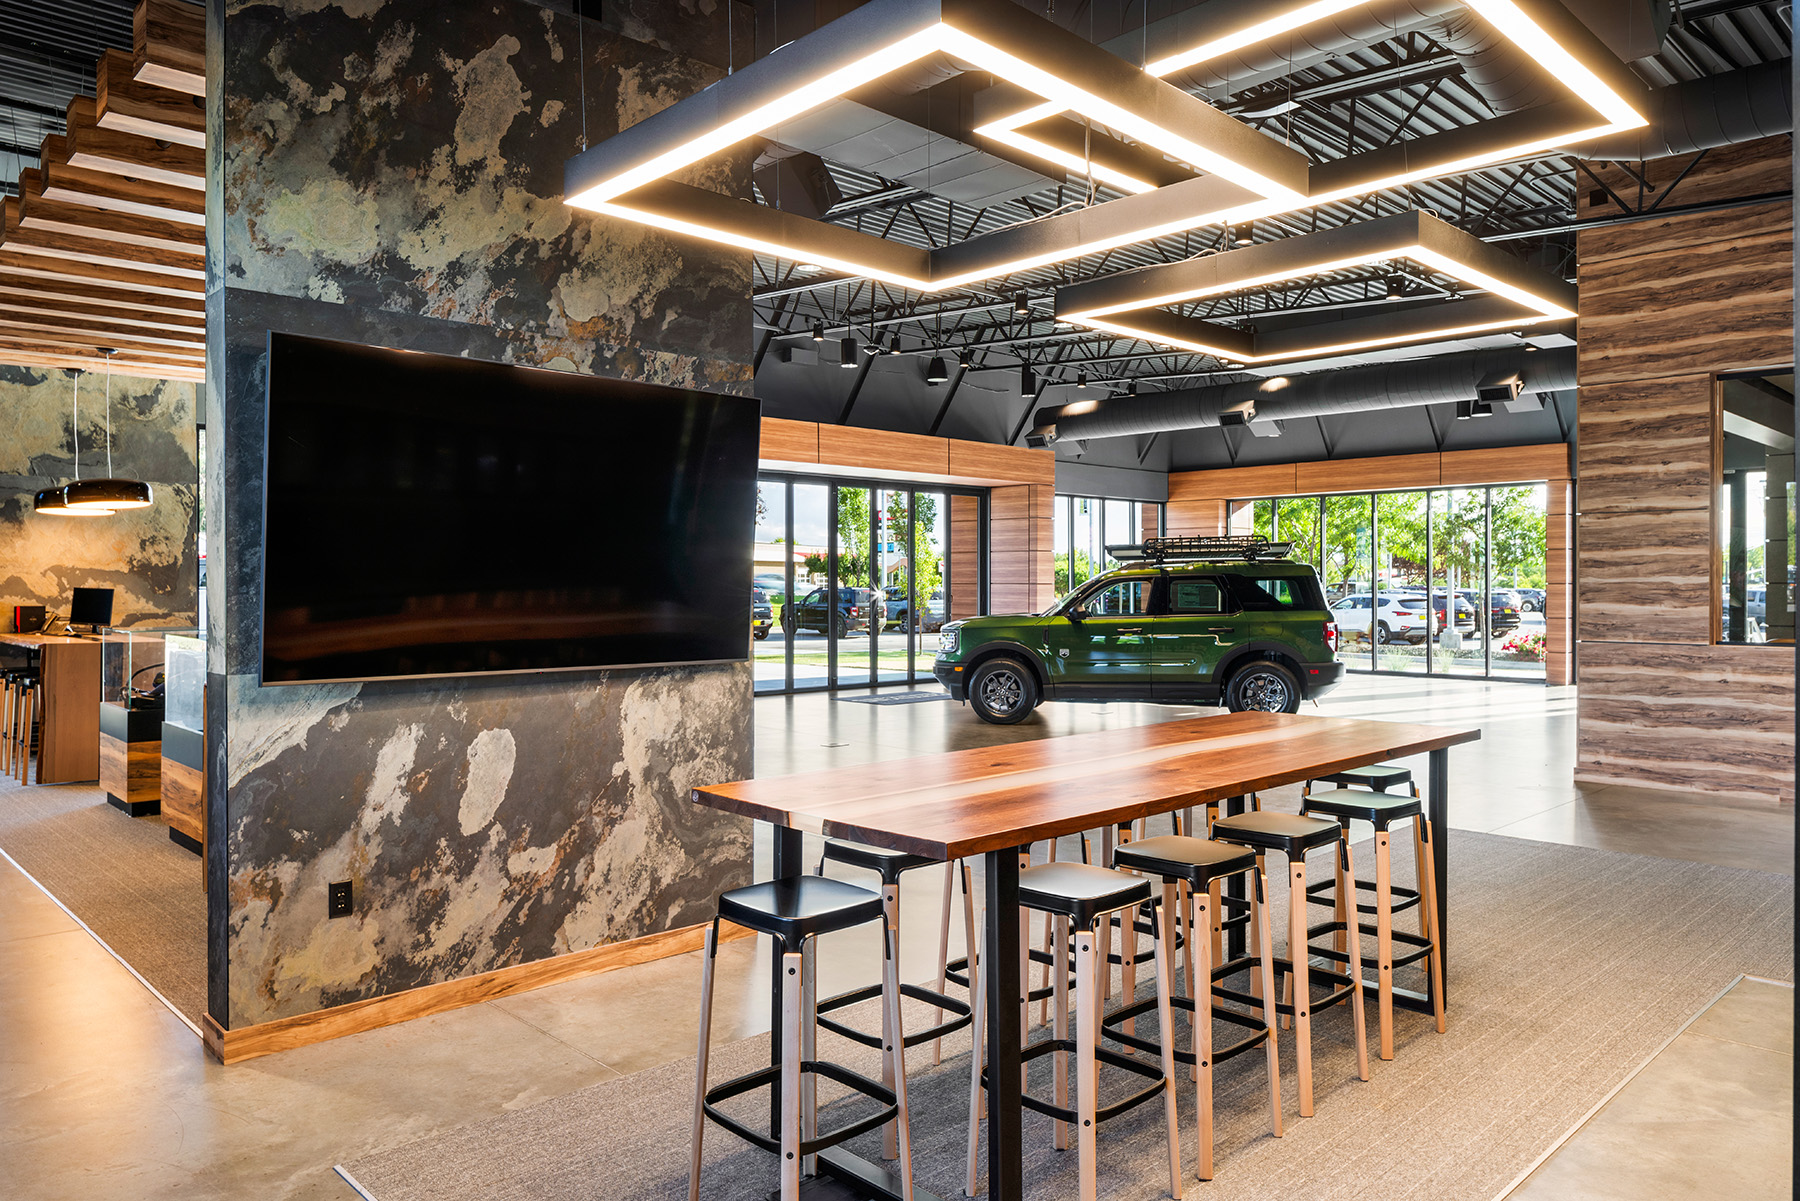 Square pendant lights by Alcon Lighting illuminate a conference table and digital screening space in the Kendall Bronco car dealership.